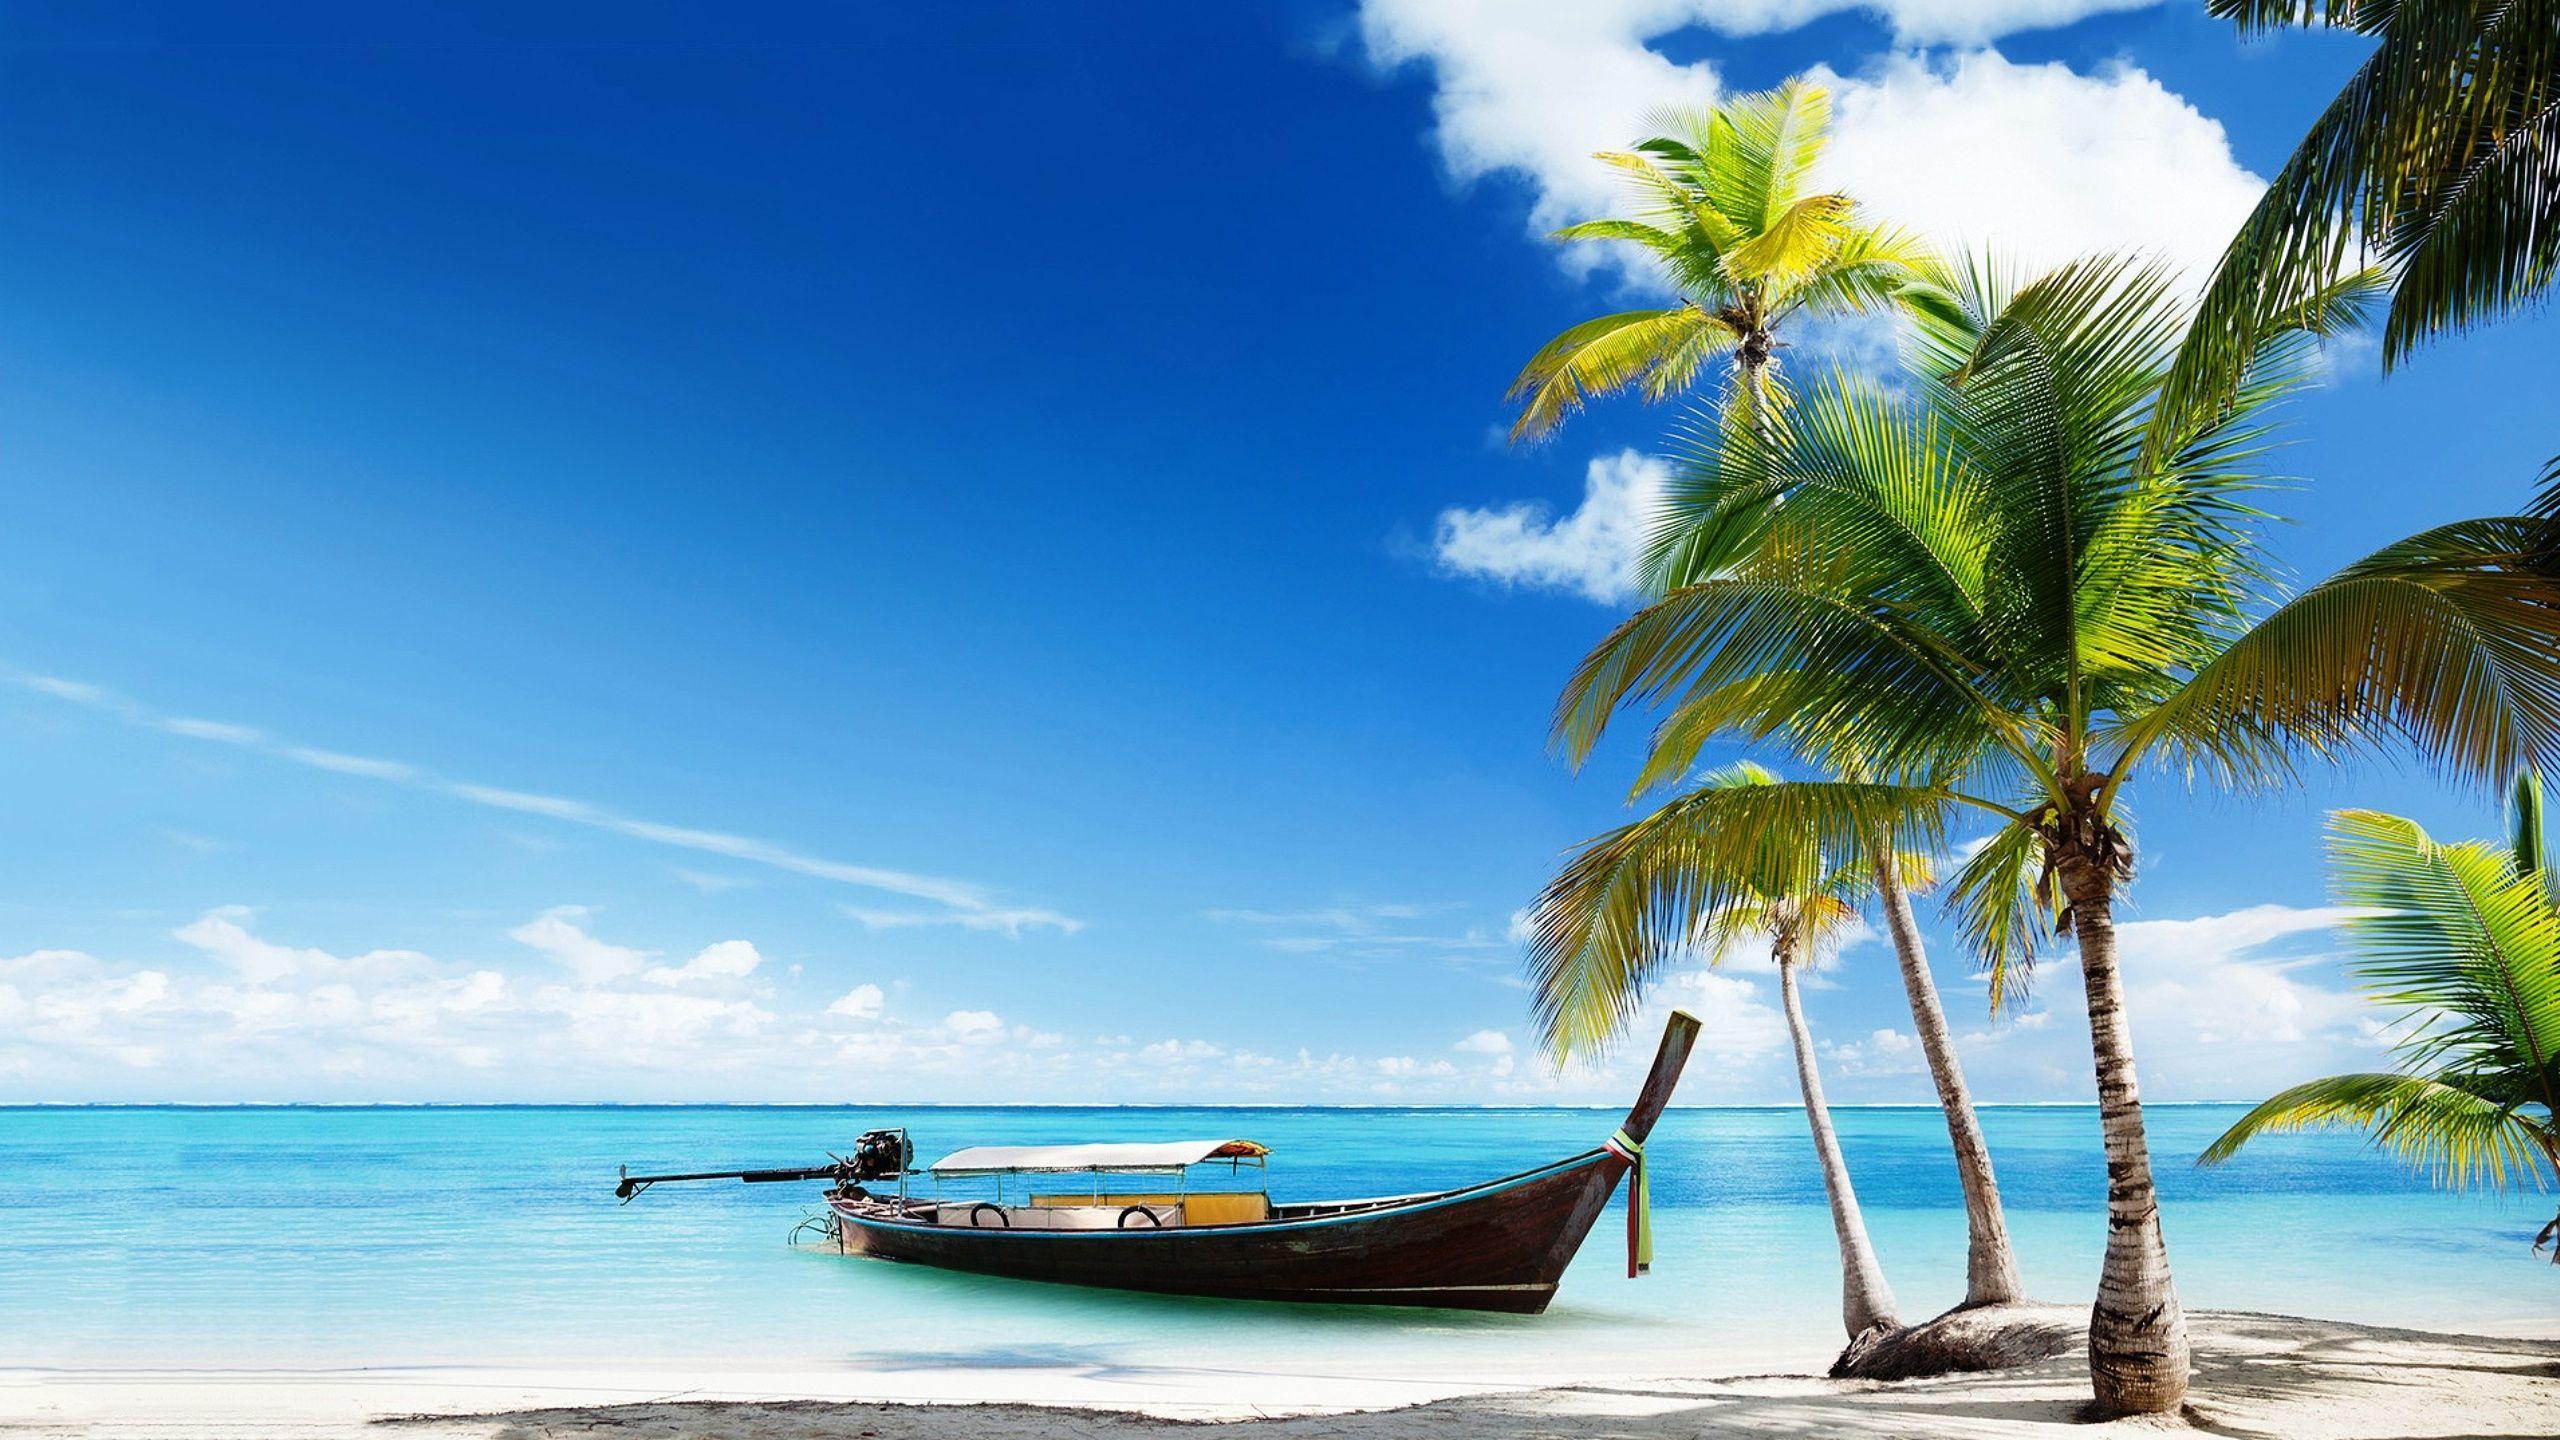 Create beautiful memories in Mauritius by planning your trip today